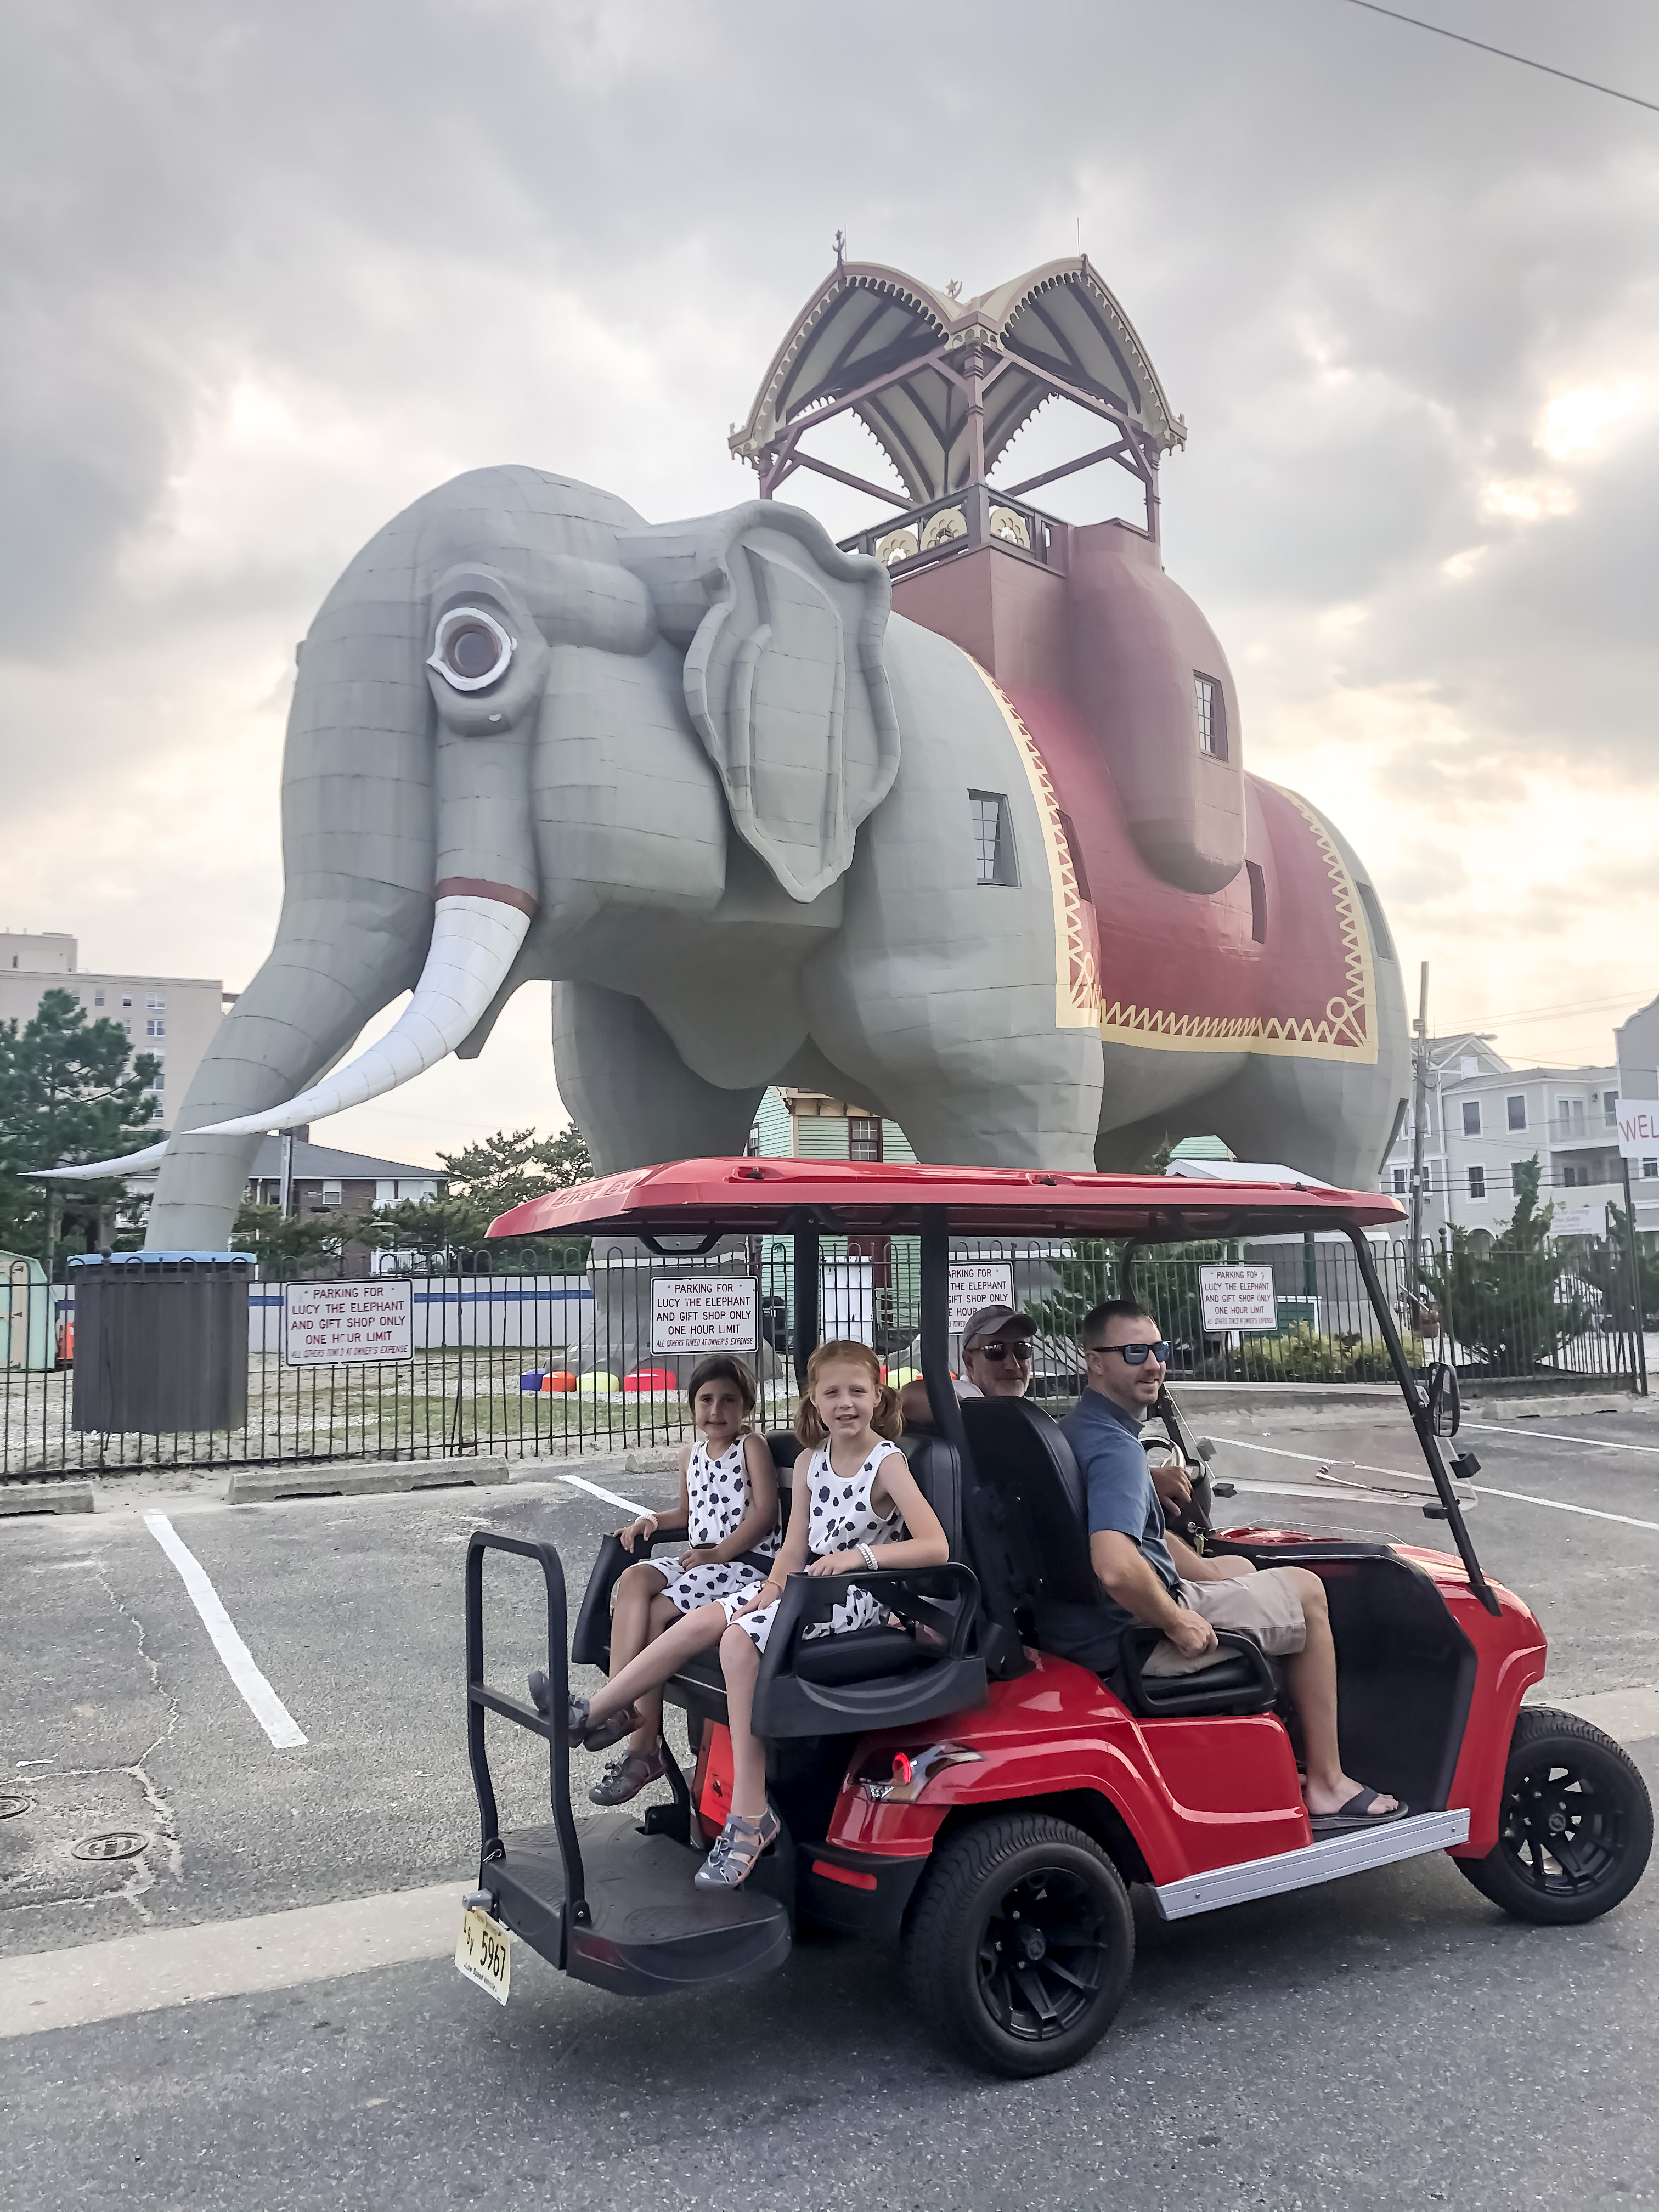 Lucy the Elephant - What is there to do in South Jersey with kids?